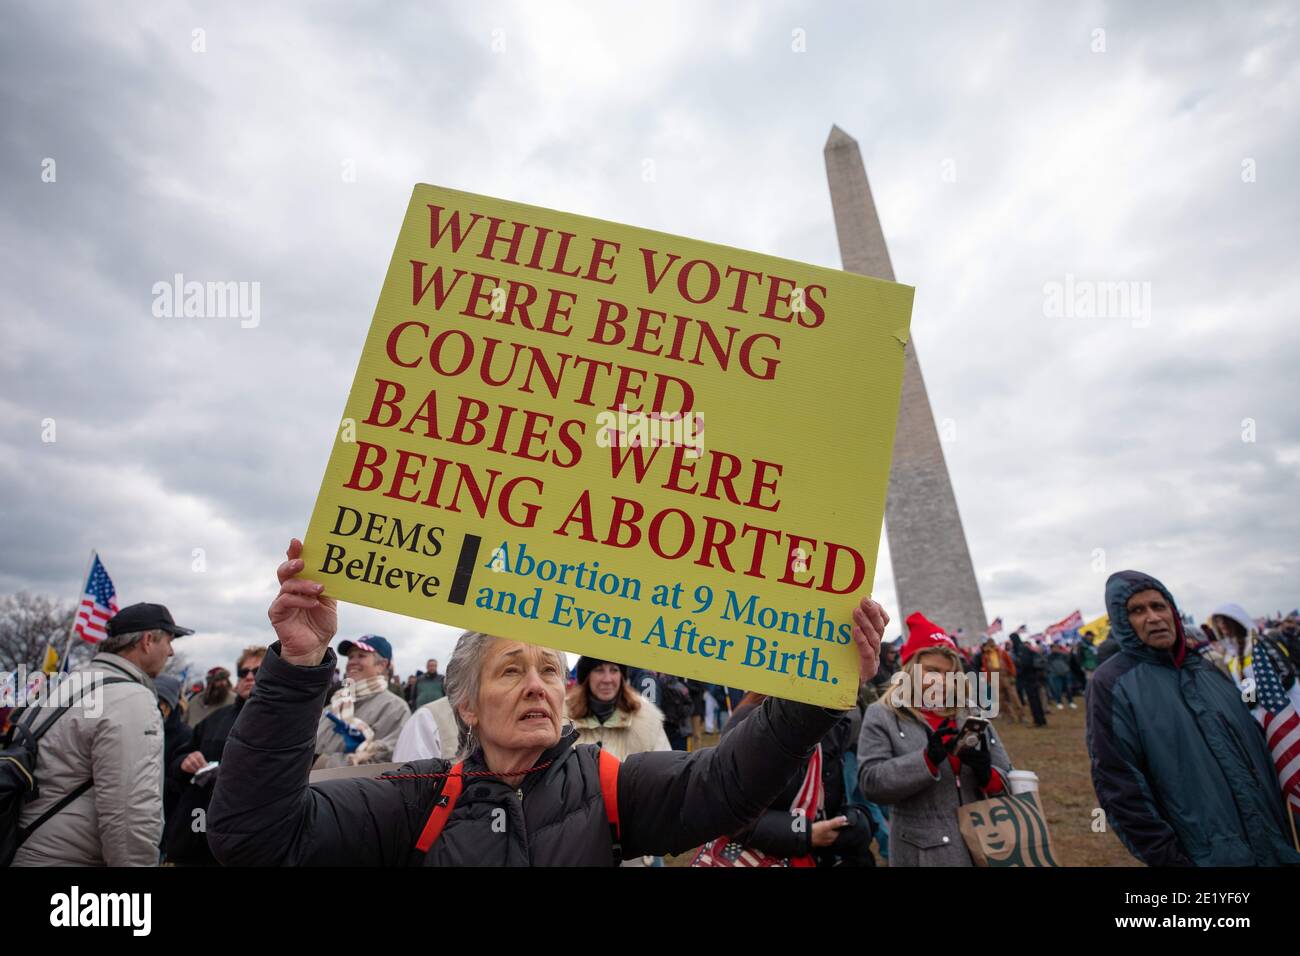 January 6, 2021: Thousands of Trump's supporters protesting at Washington Monument in support of President Donald Trump during a rally 'Save America March'', today on January 06, 2021 in Washington DC, USA. Credit: Eman Mohammed/ZUMA Wire/Alamy Live News Stock Photo